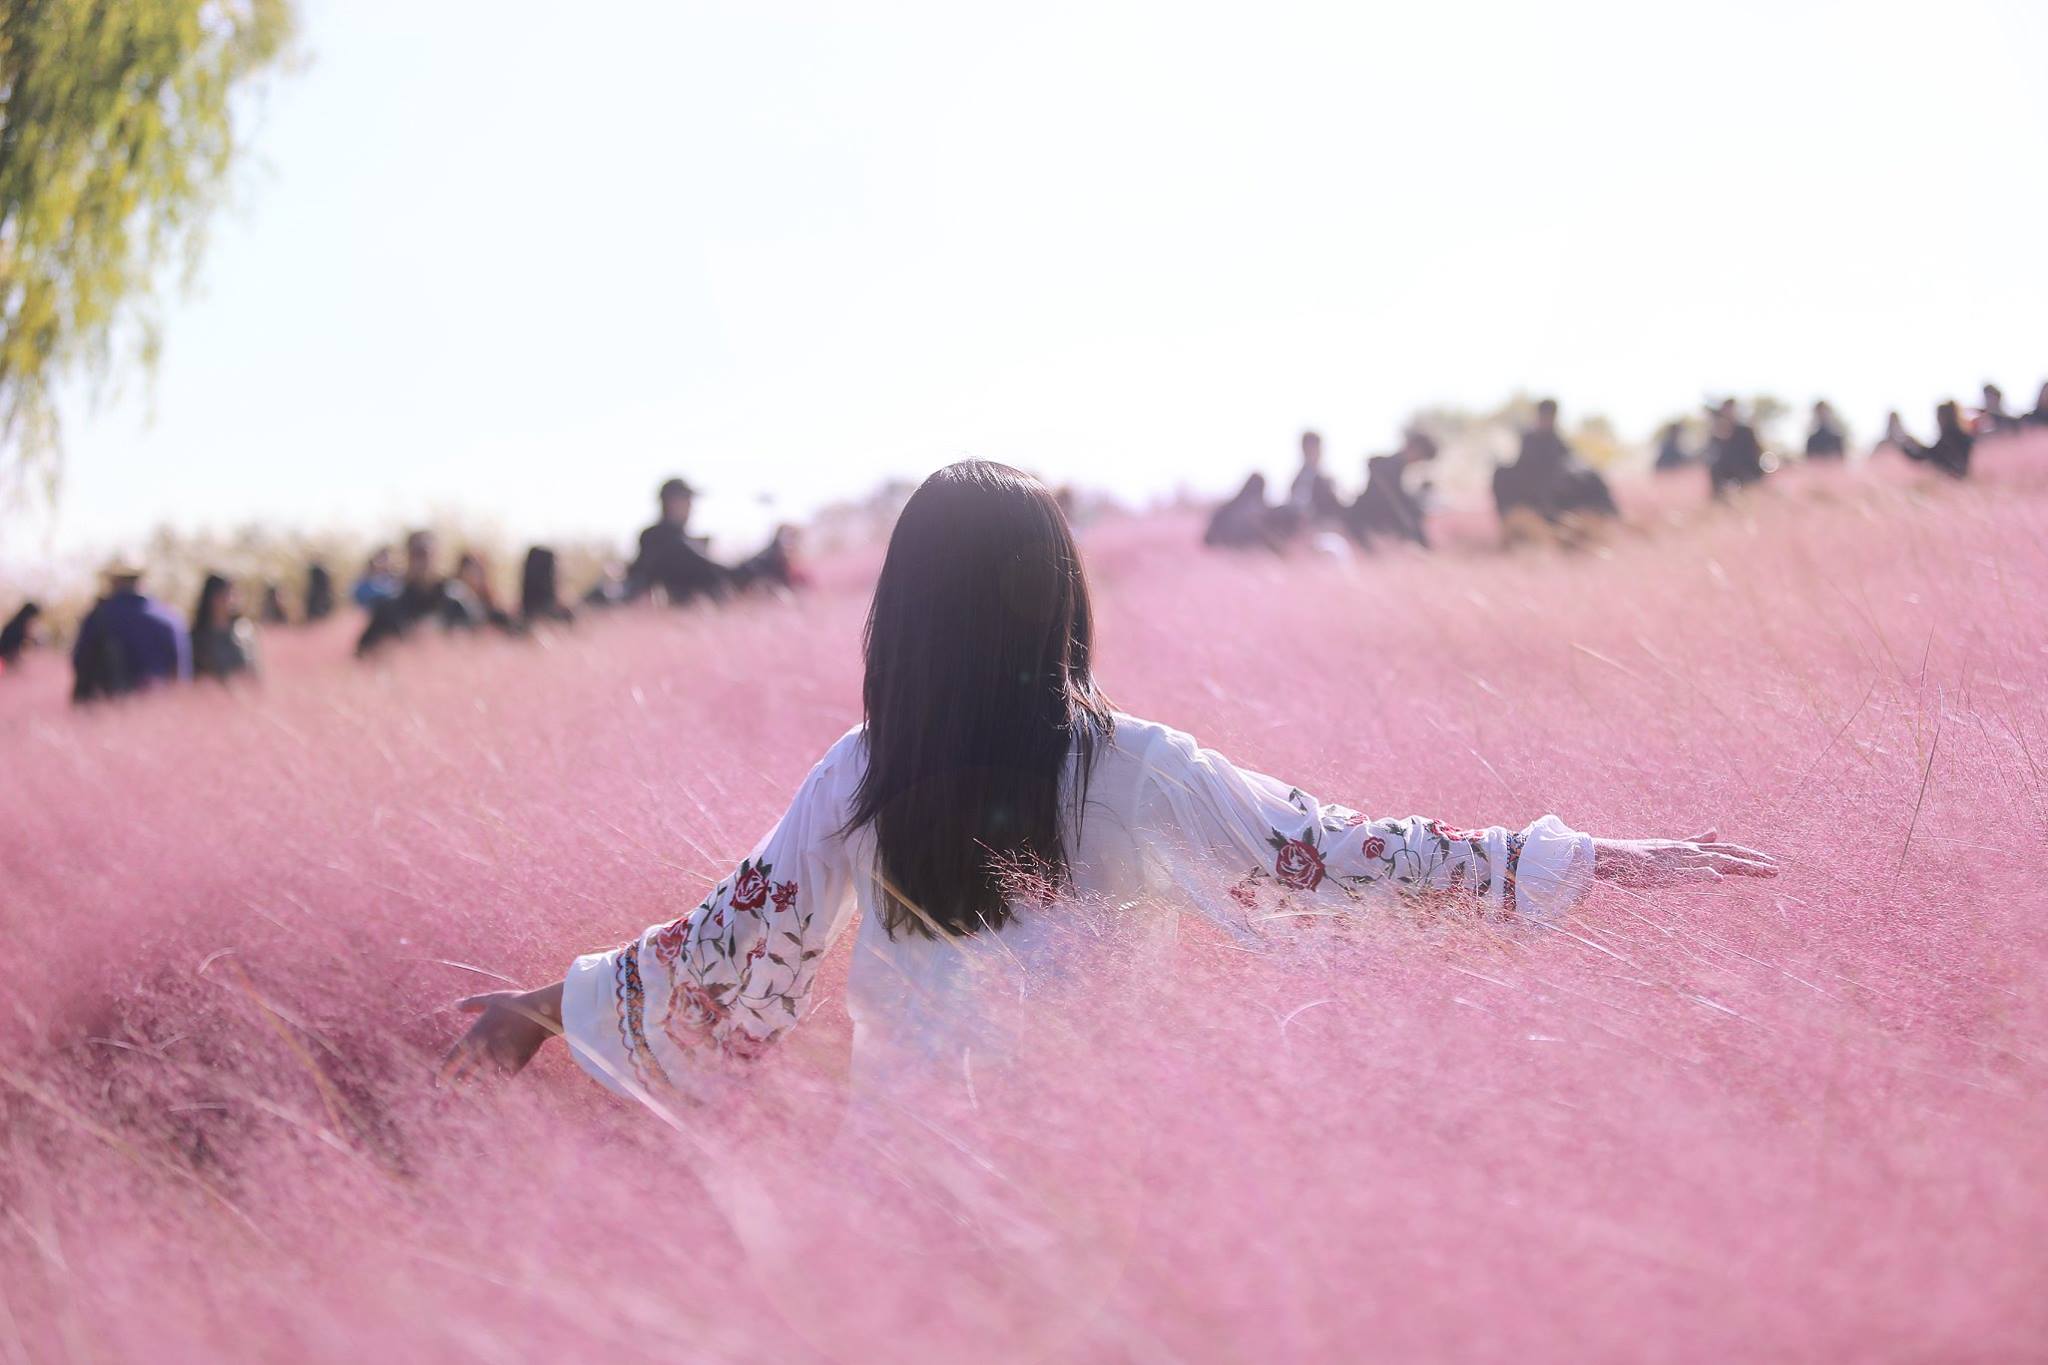 2019 Best Pink Muhly Spots in Seoul Area